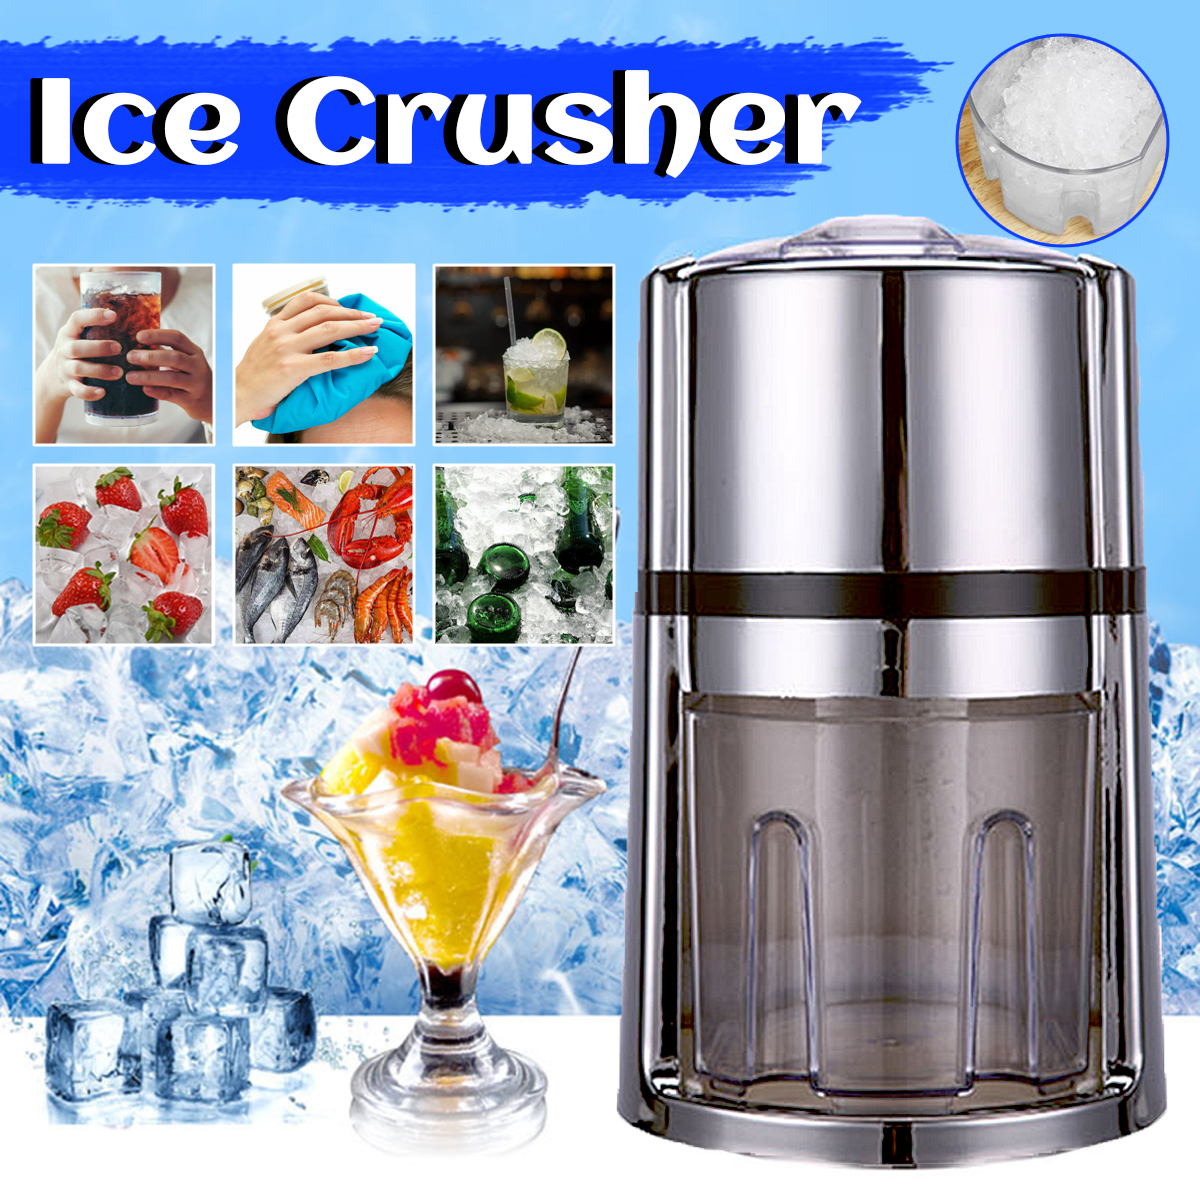 15L-Portable-Manual-Ice-Crusher-Ice-Maker-Snow-Cone-Machine-Ice-ShaverStainless-Steel-Ice-Cream-Scoo-1928427-1